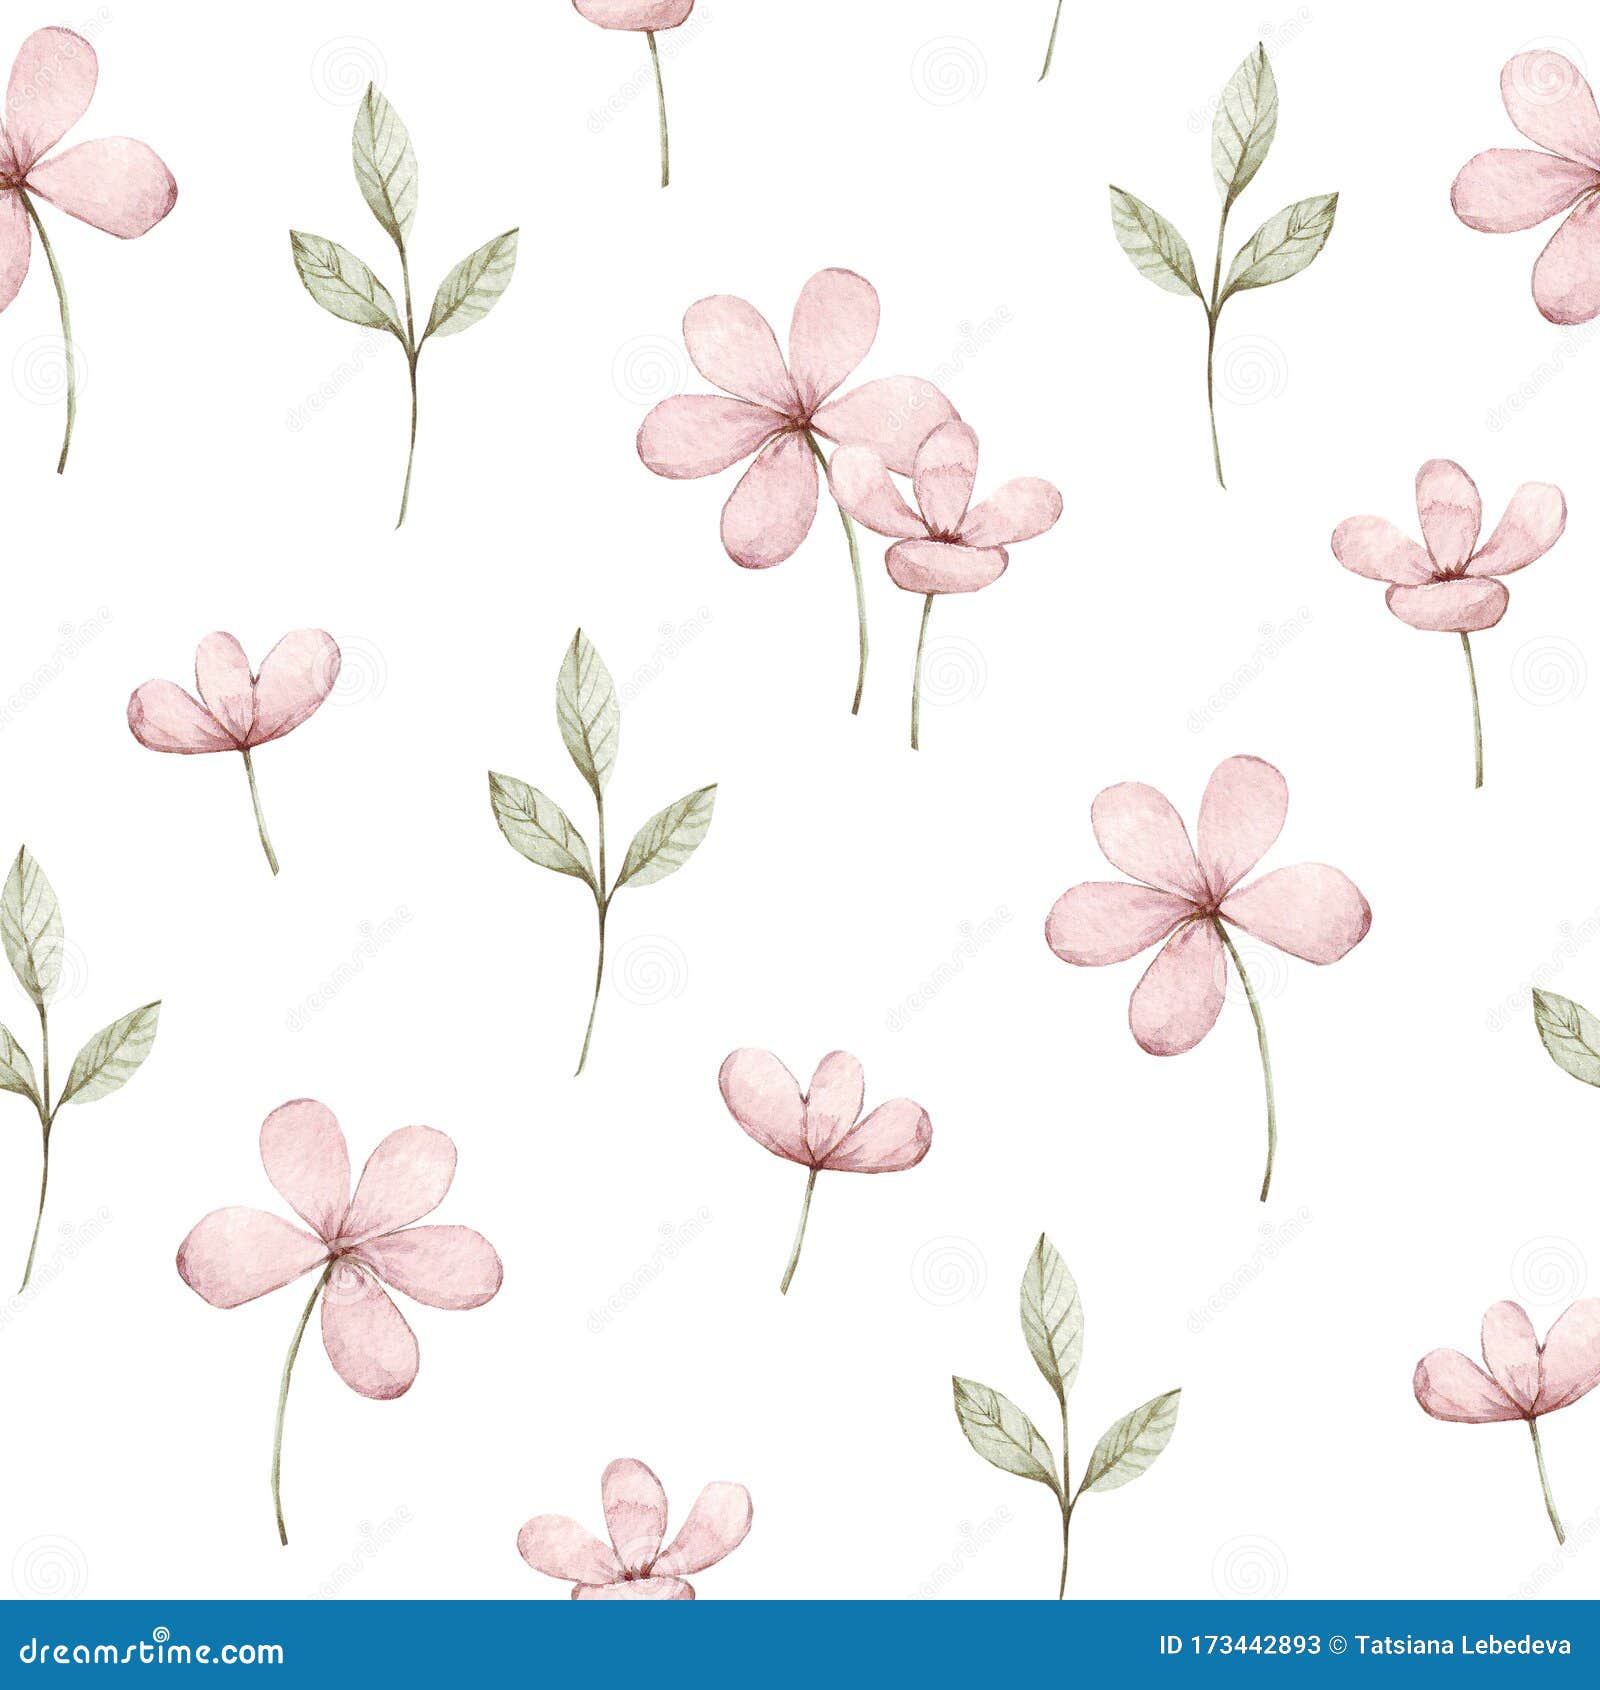 Cute Pink Flowers On A White Background Seamless Pattern Watercolor Illustration Fabric Wallpaper Print Texture Perfectly For Stock Illustration Illustration Of Nature Design 173442893